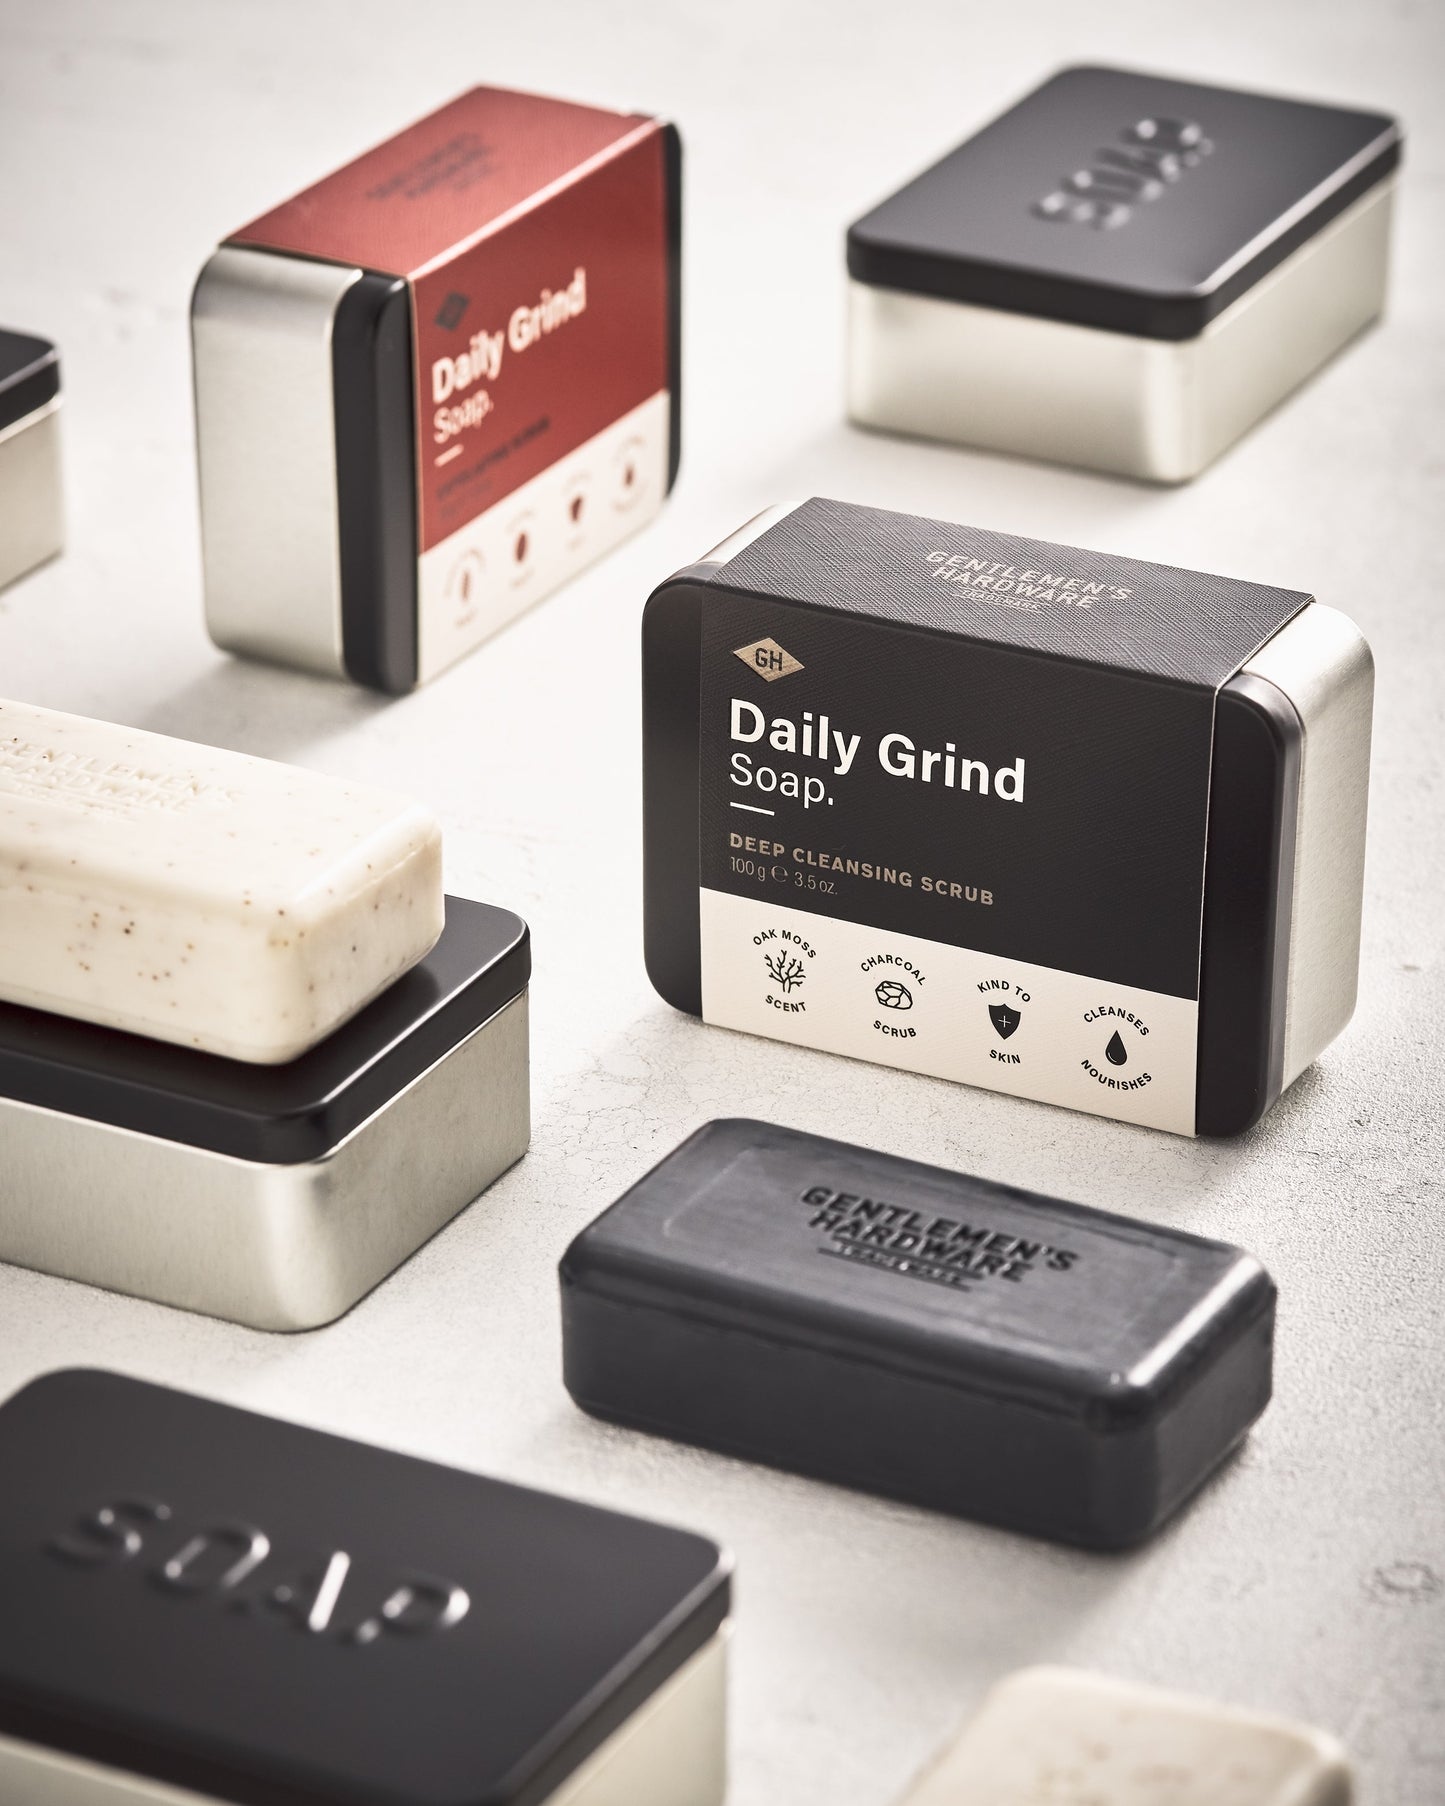 Daily Grind Soaps - Mixed CDU of 8